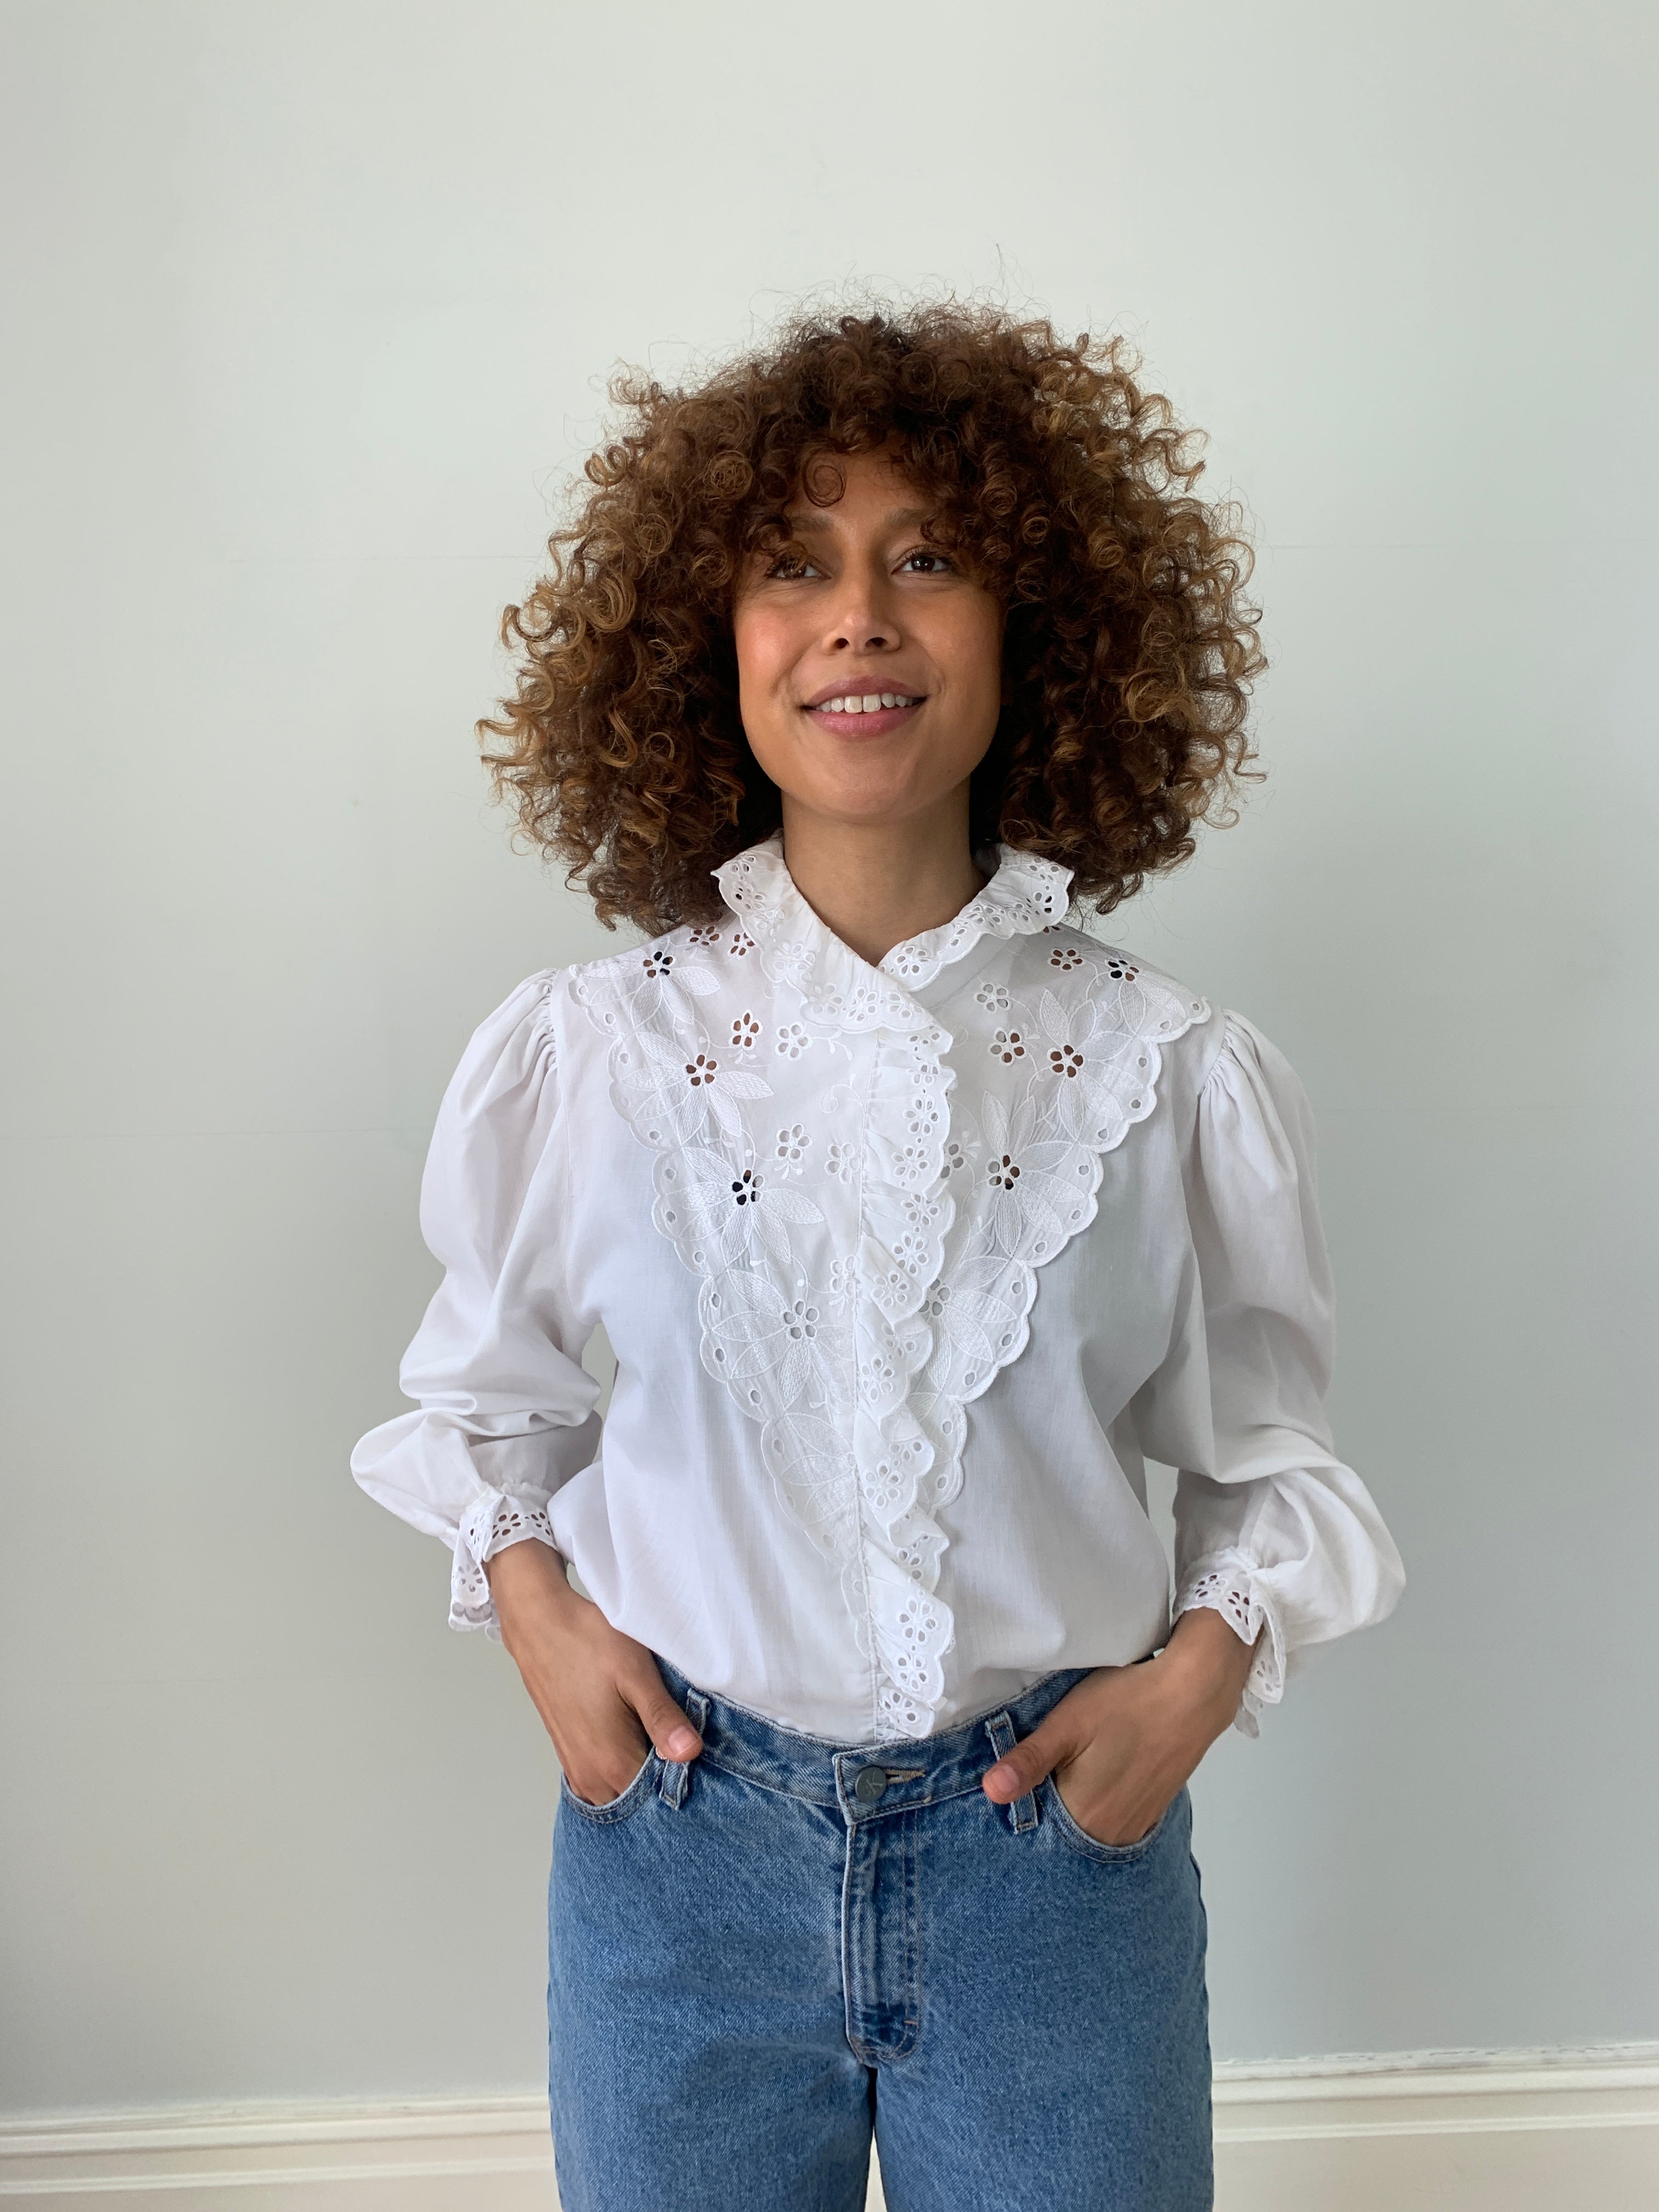 Vintage 1980s embroidery anglaise blouse